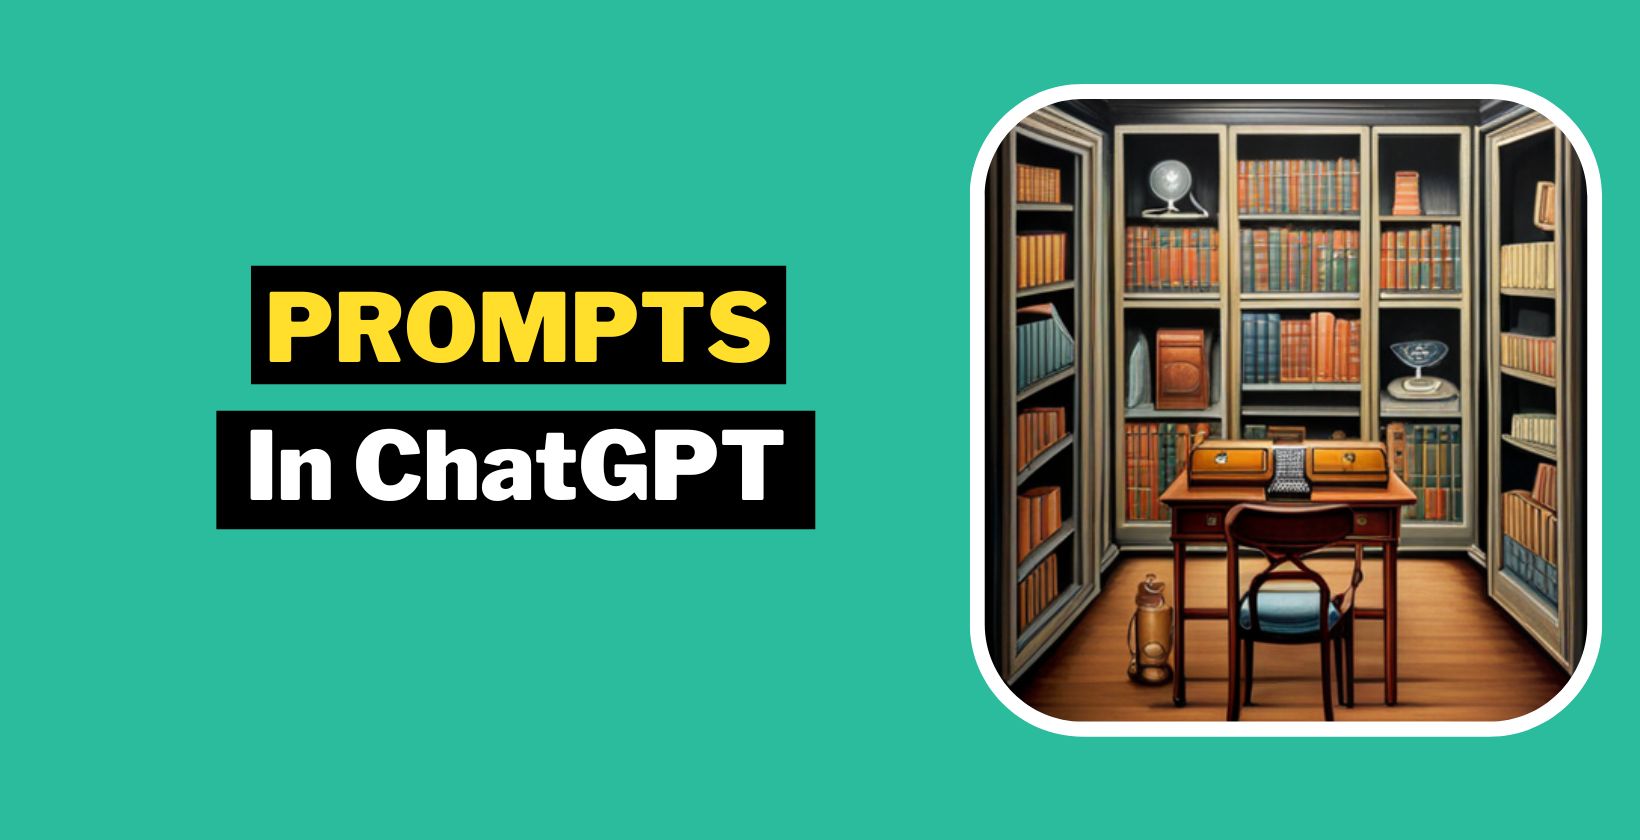 What are Prompts in ChatGPT